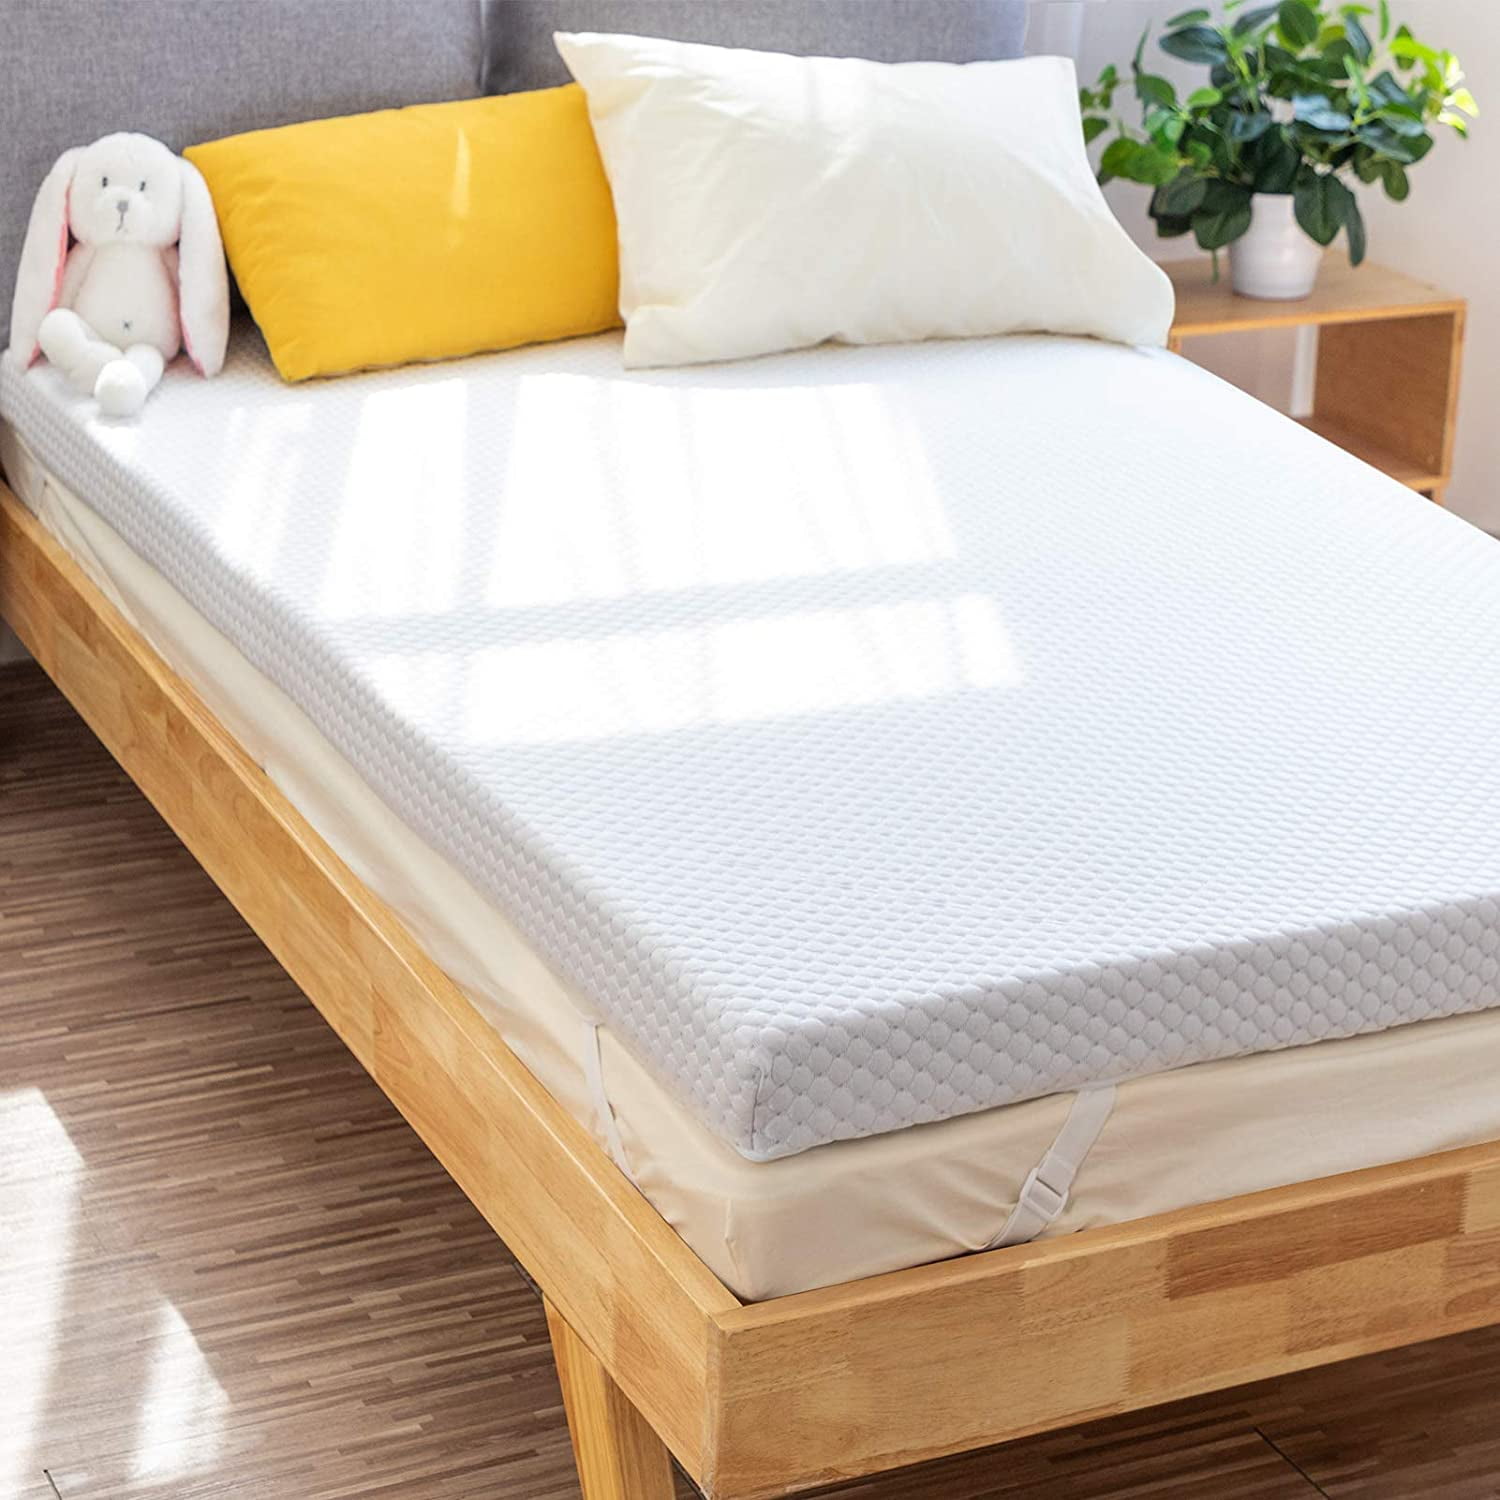 Luxury Bamboo Memory Foam Soft Cot Bed Mattress With Removeable Zipped Cover 